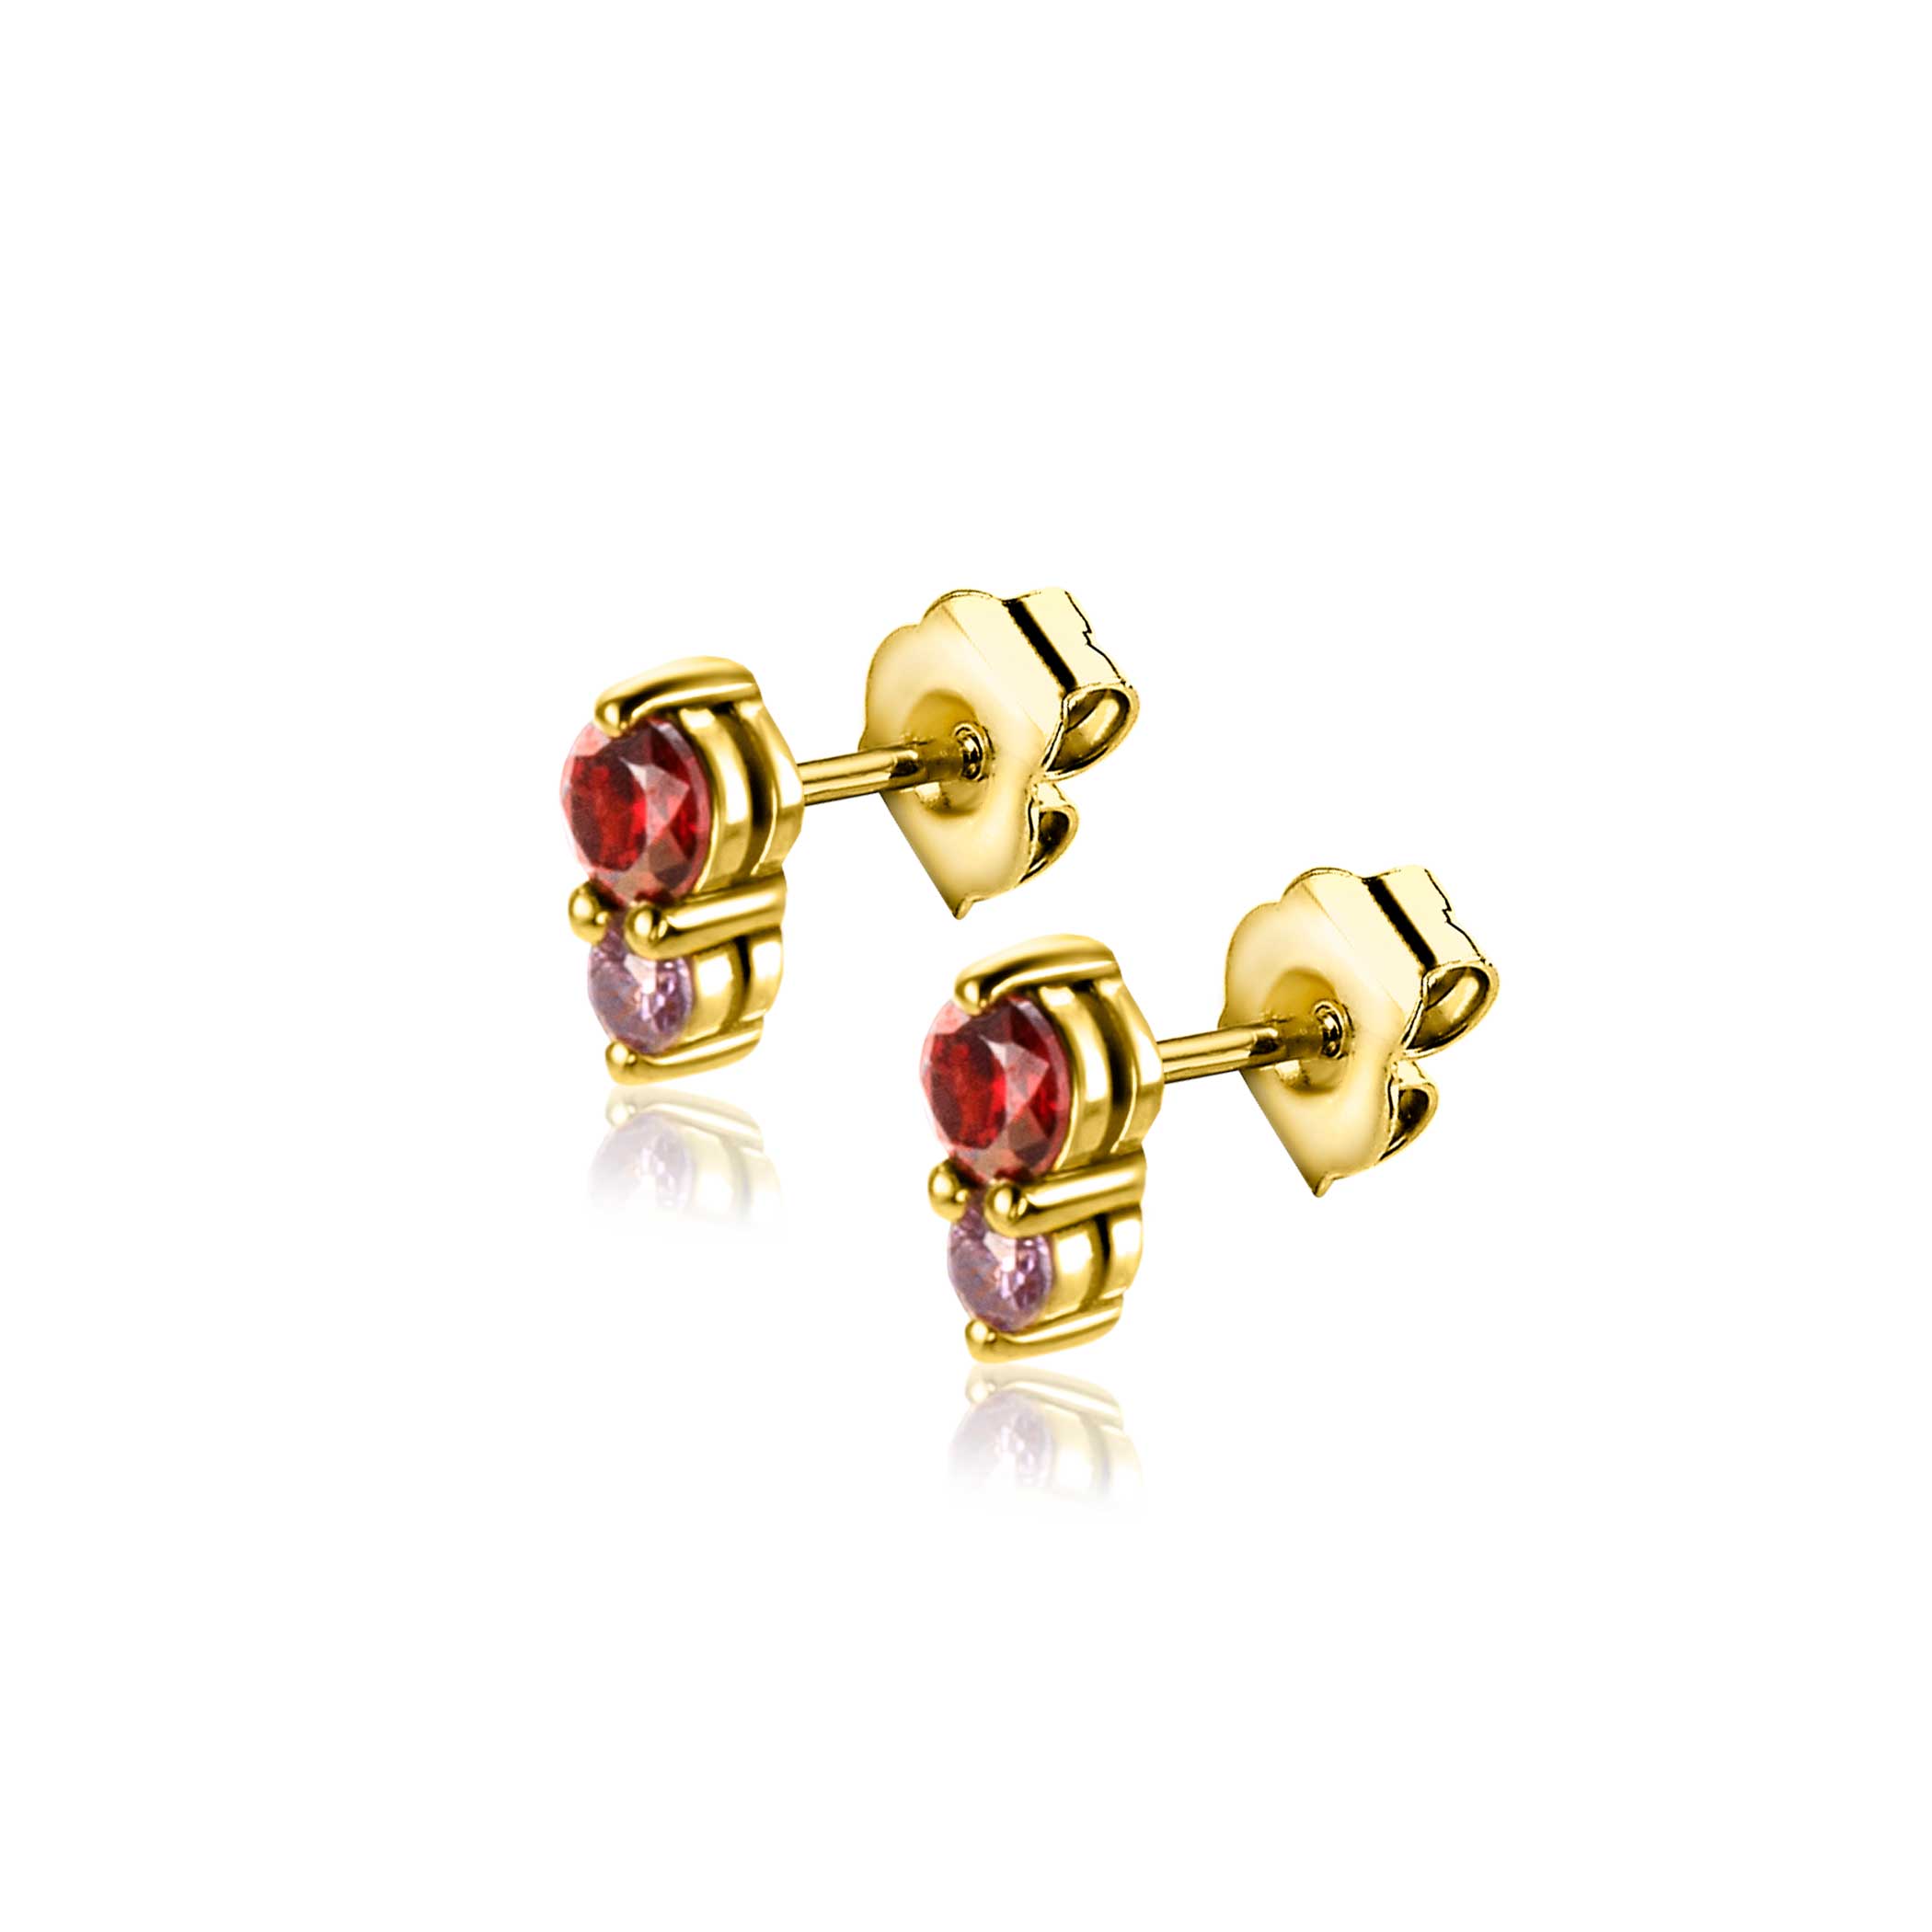 6,5mm ZINZI Gold Plated Sterling Silver Stud Earrings Prong Settings Red Garnet and Purple Color Stones ZIO2563